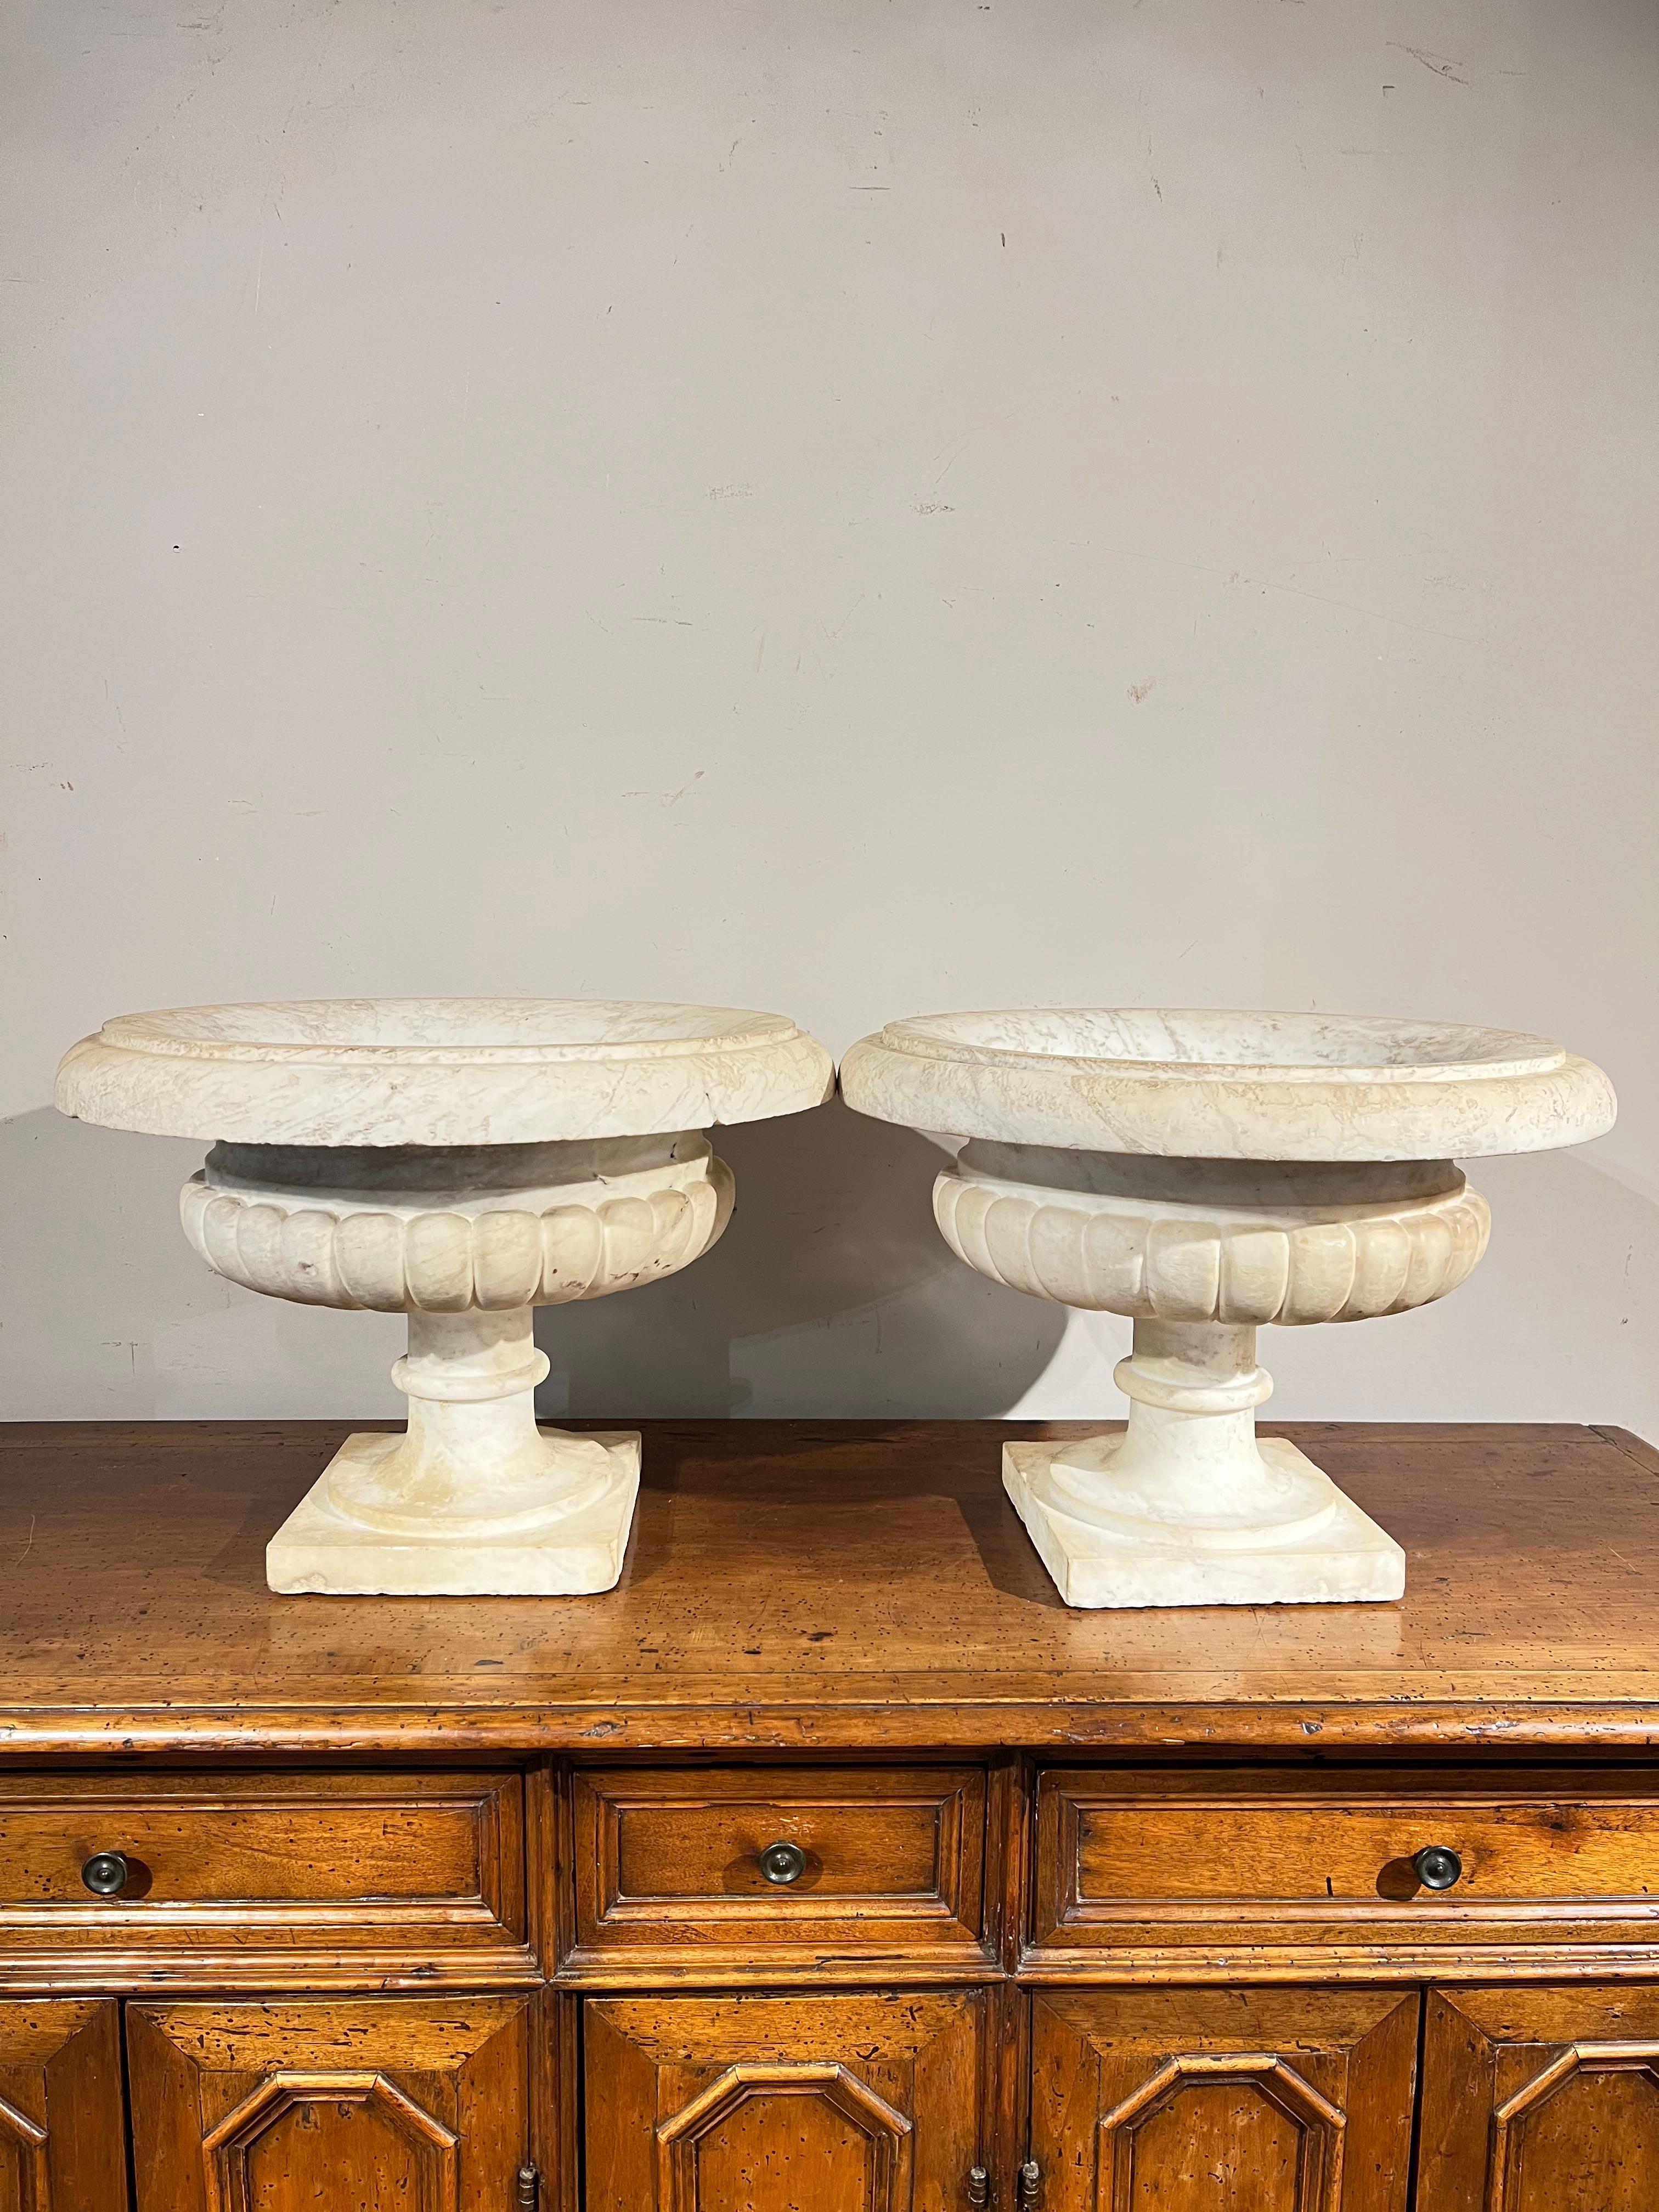 Beautiful pair of Medici-shaped basins in white Carrara marble with ribbed body on raised base.

In the center they have a hole, useful for water drainage when used as plant pots.

MEASUREMENTS: h cm 36, diameter cm 50, base cm 21.5x21.5.